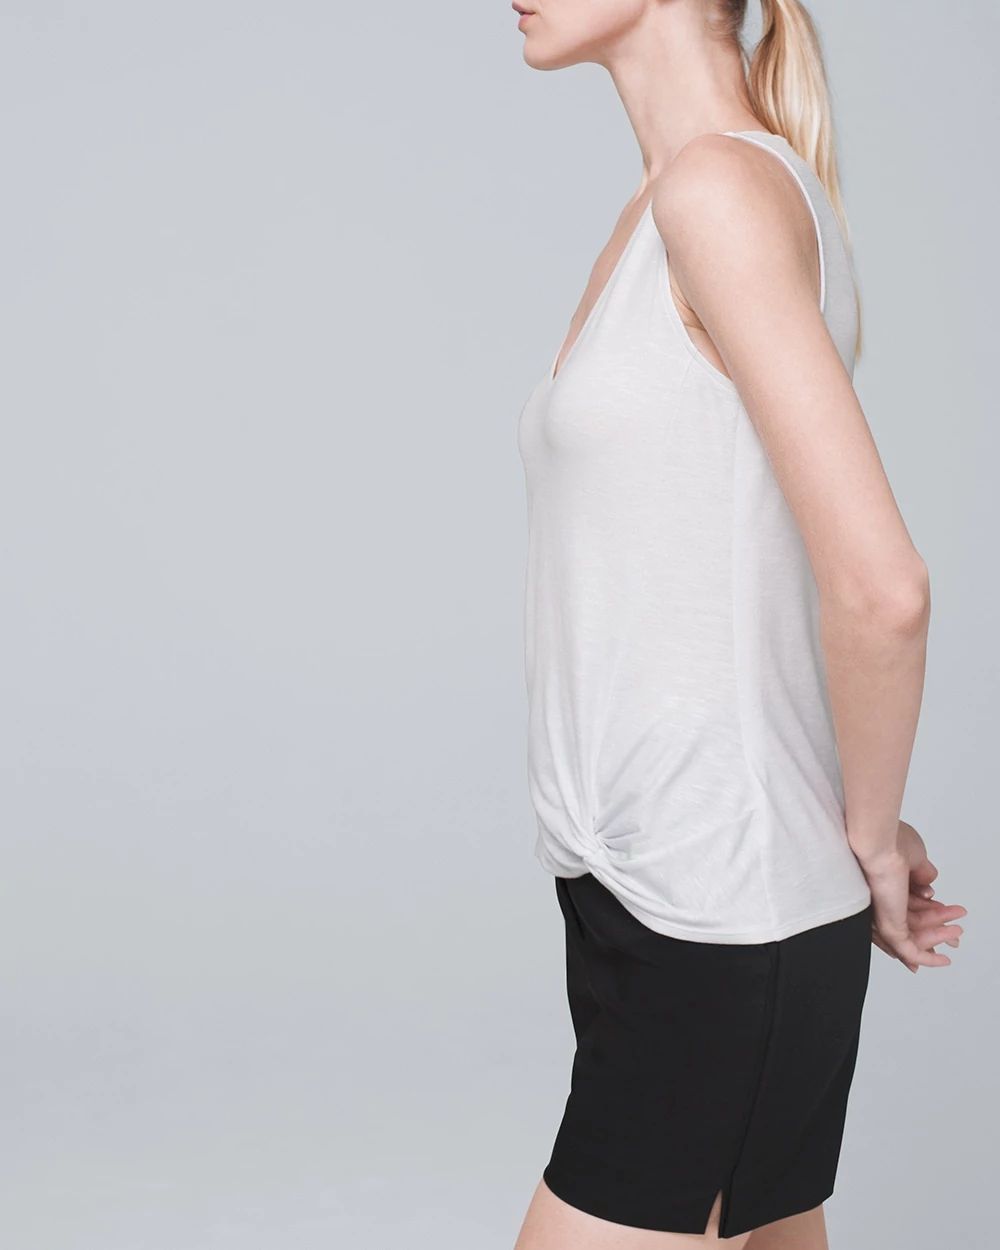 Everyday Twist-Hem Tank click to view larger image.